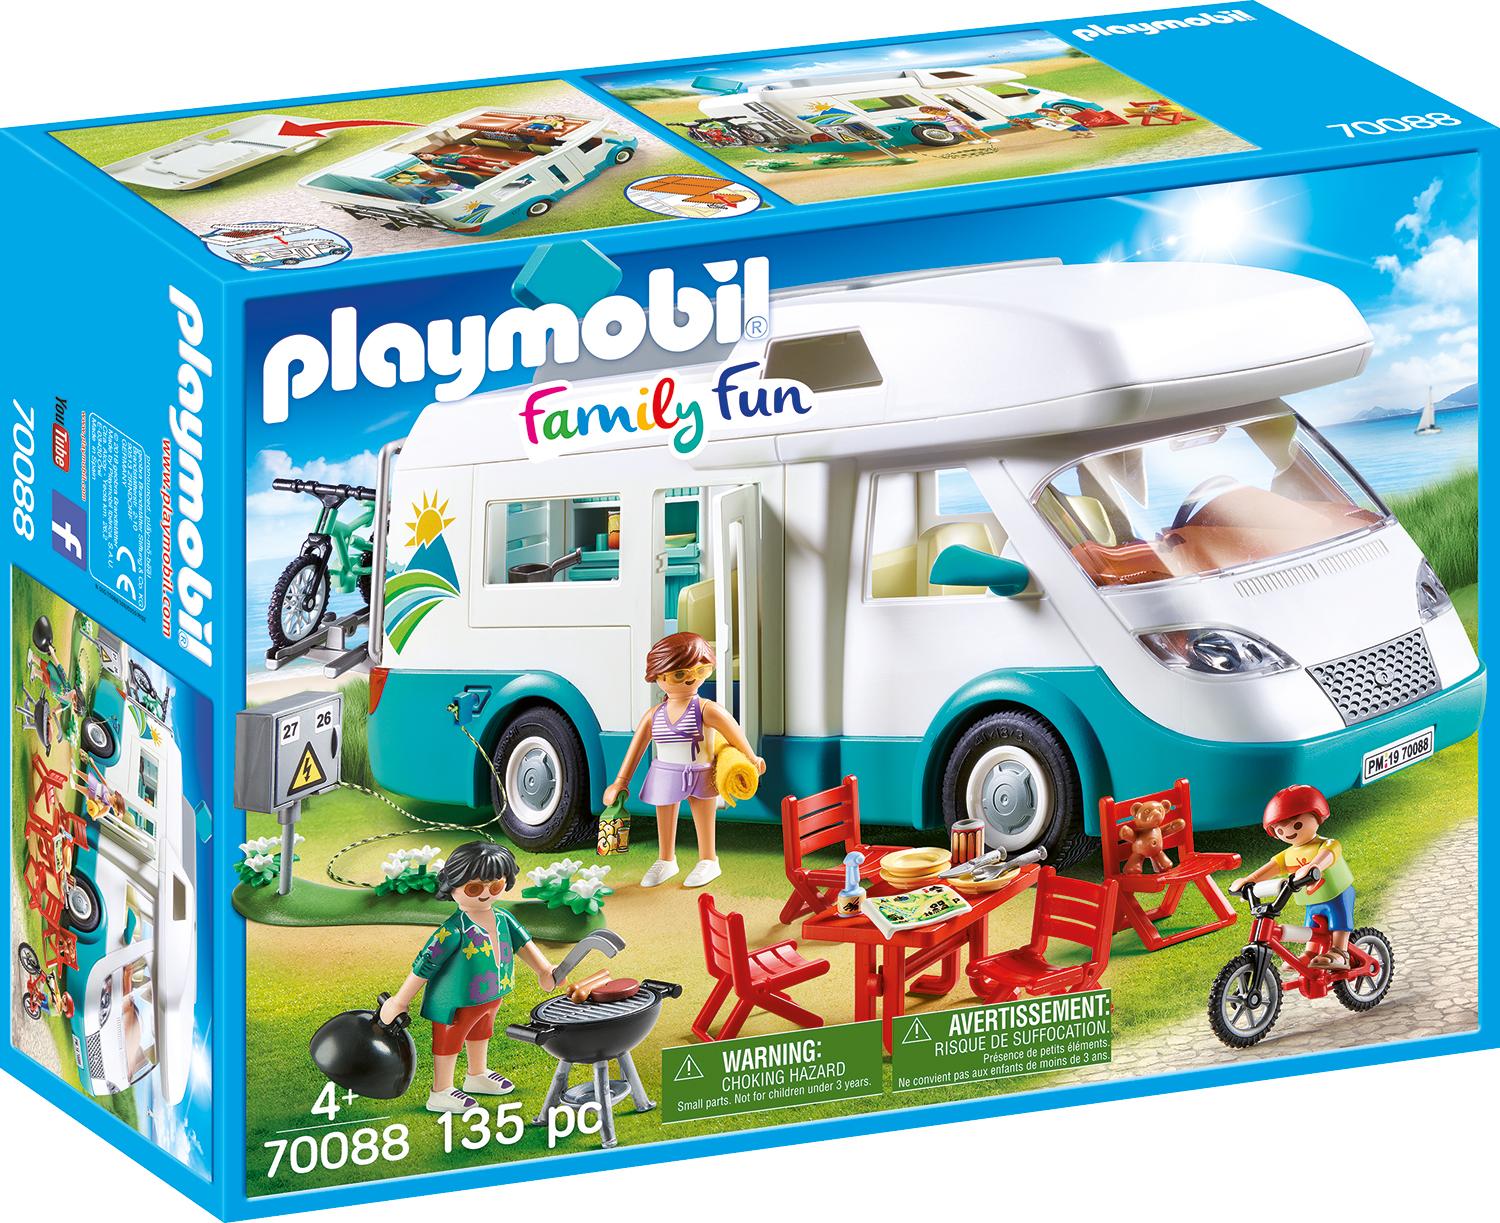 Playmobil® Konstruktions-Spielset »Familien-Wohnmobil, Family Fun«, (135 St.), Made in Europe von Playmobil®